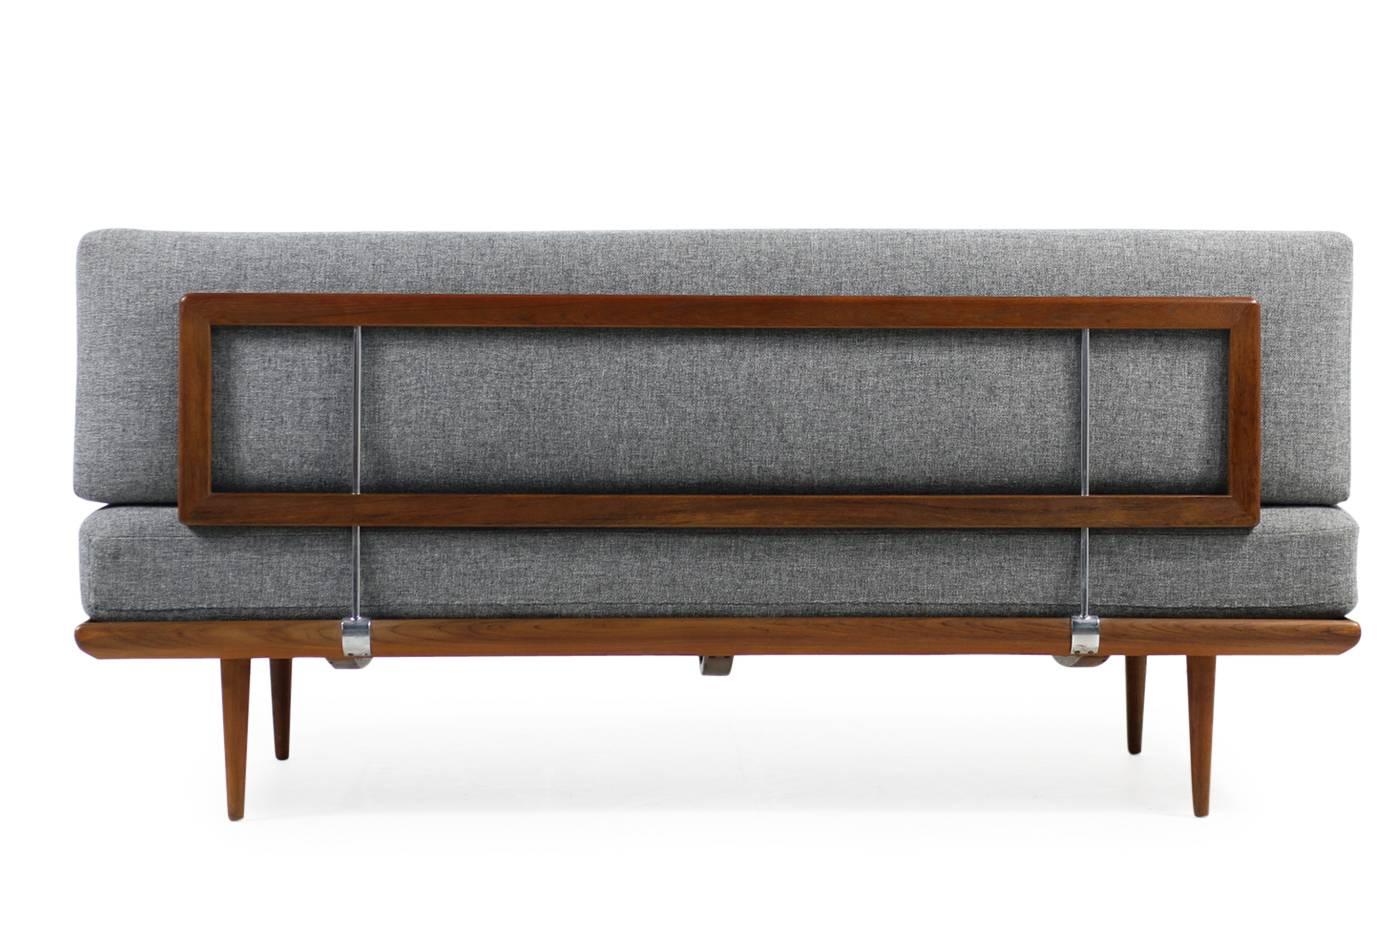 Beautiful 1960s Peter Hvidt & Orla Molgaard Nielsen teak daybed, early edition for France & Daverkosen Denmark. Spring core mattress, reupholstered, also the back cushion and both covered in a wool/cotton woven fabric in high quality, about 1 year